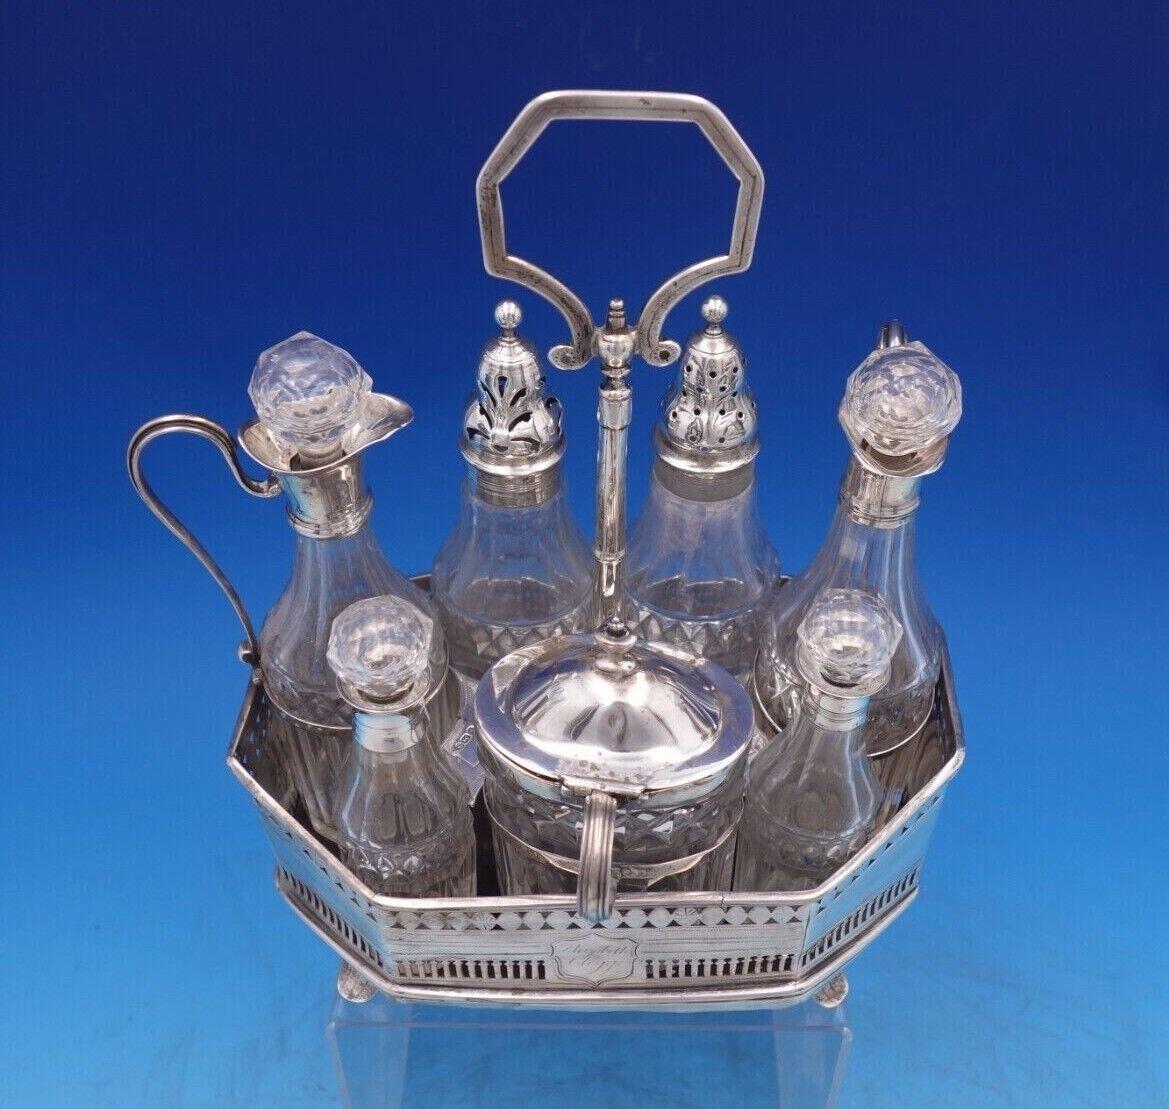 Fabulous English Georgian sterling silver seven piece cruet set with stand made in London circa 1793. This set includes bottles for salt, pepper, mustard, oil, vinegar, and two smaller jars. The stand is pierced and footed, and has a handle and a